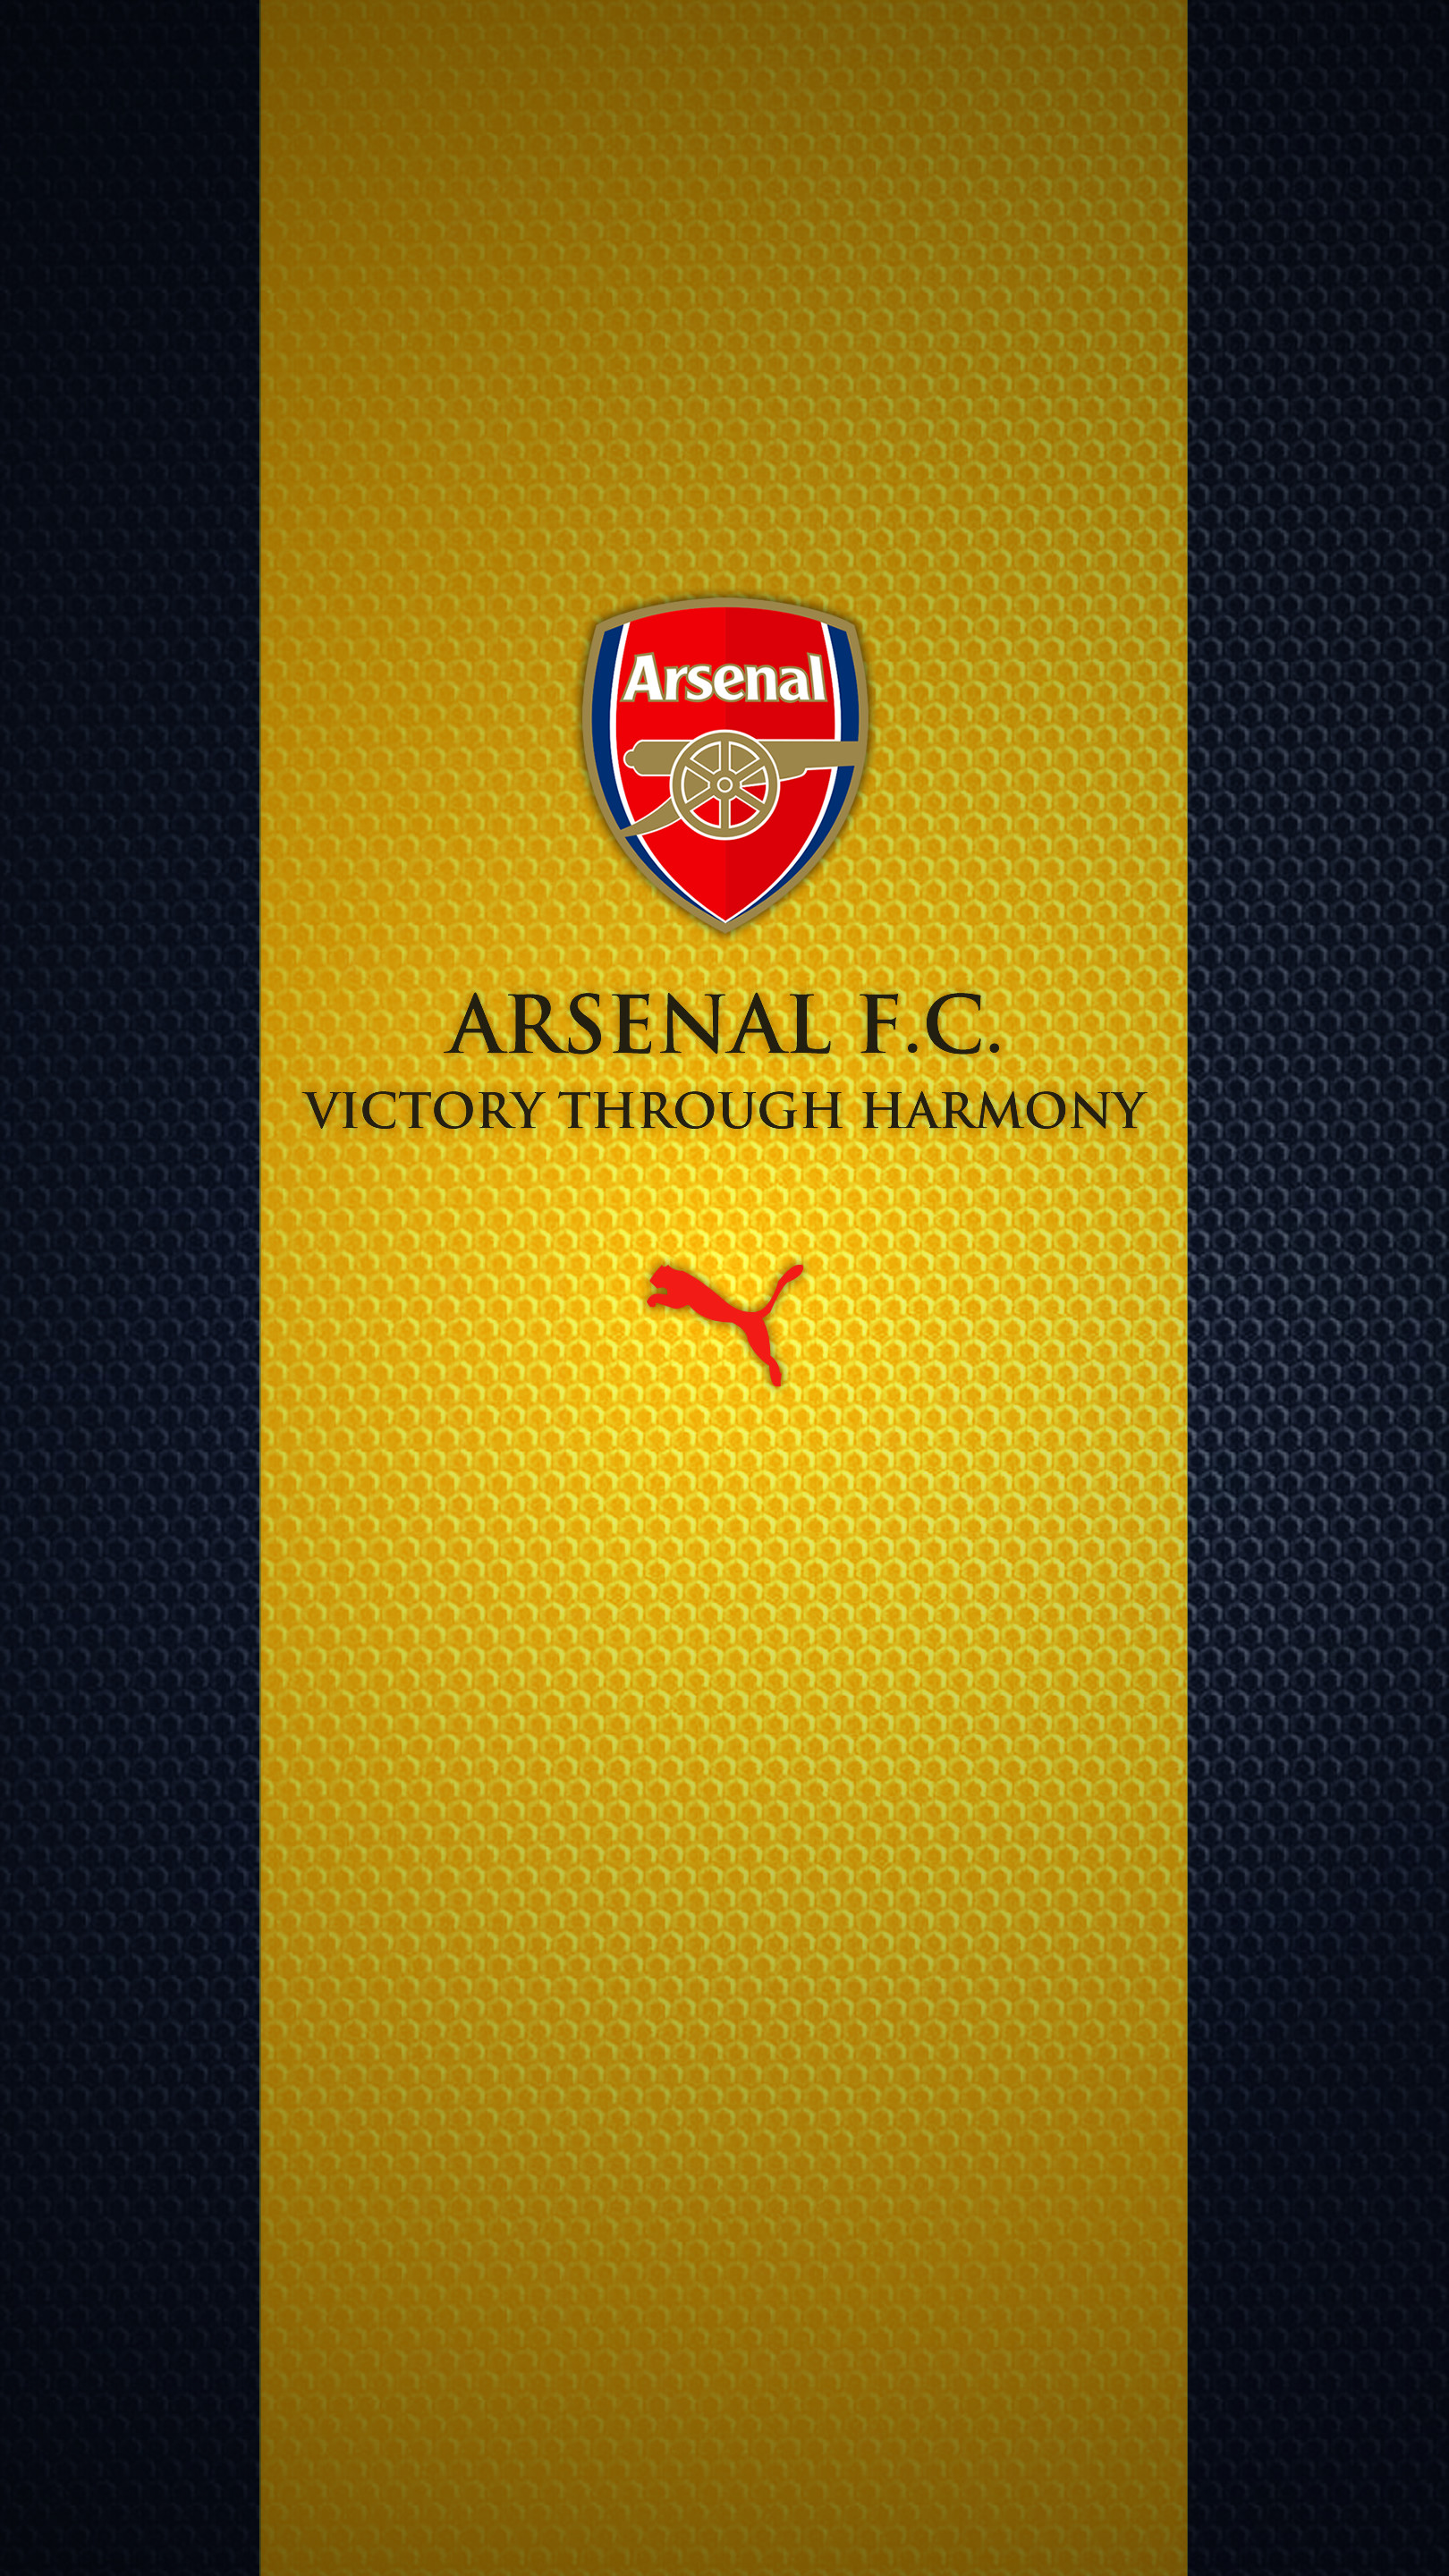 Arsenal Iphone Wallpaper Arsenal F C 3079734 Hd Wallpaper Backgrounds Download